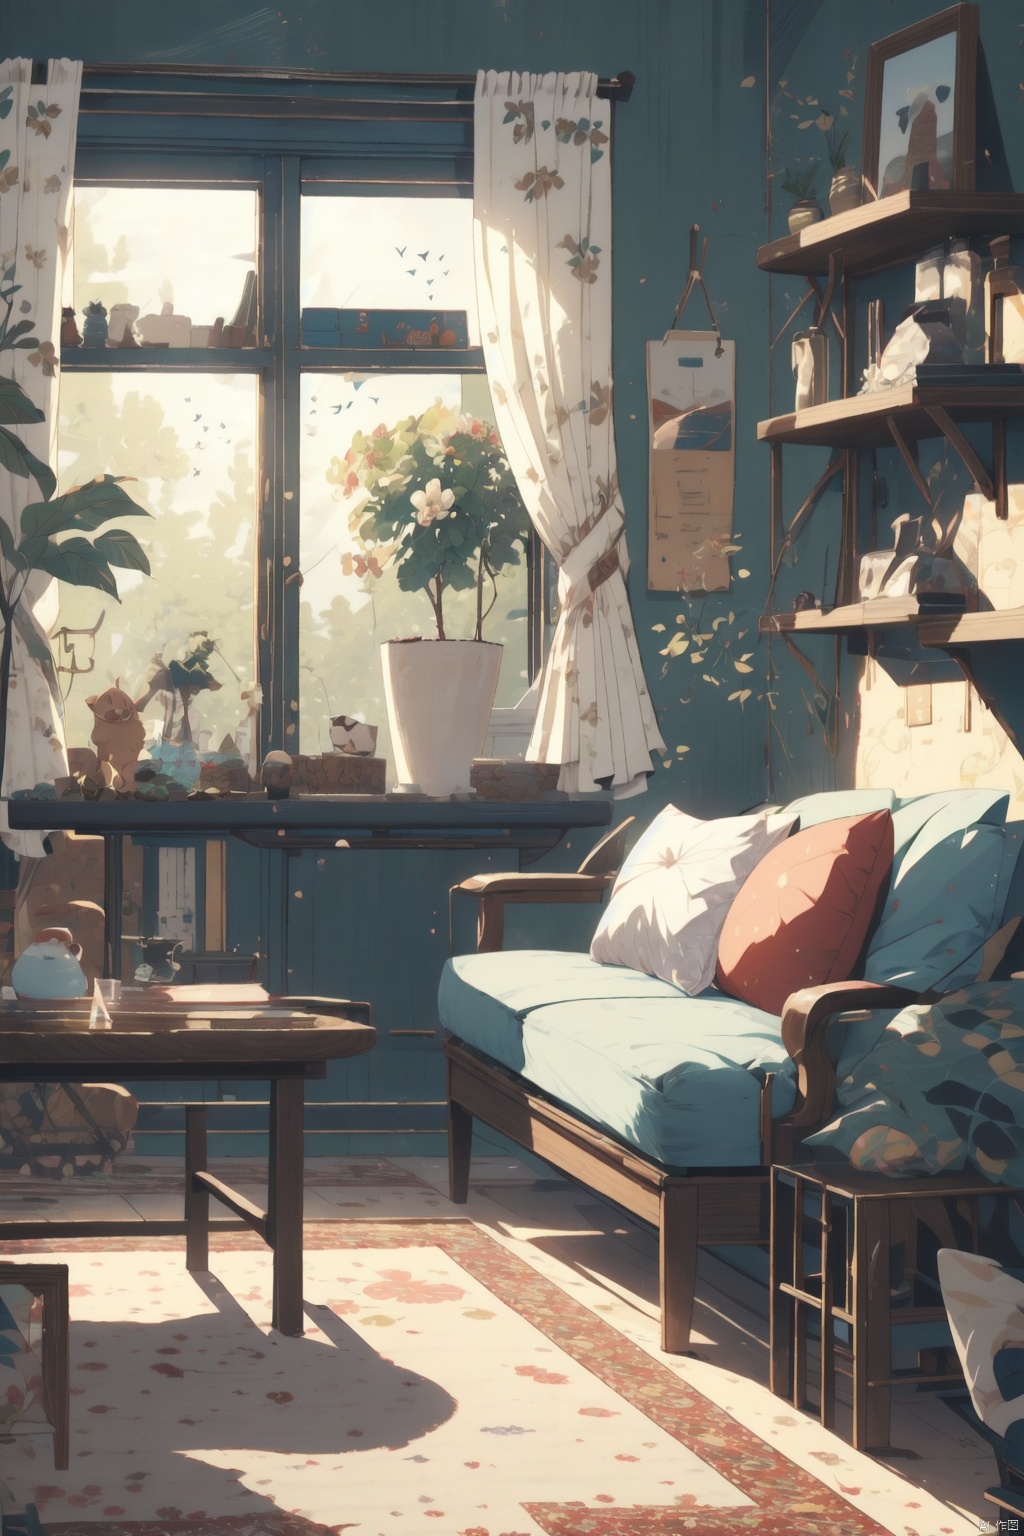  Masterpieces, Panoramic, A Teenage Girl, Solo Focus, Long Hair, Off-the-Shoulder Dress, Casual Wear, Sitting on the Sofa, Sitting on the Floor, Exquisite Living Room, Deep Scene, Picture Frame on the Wall, Curtains, Modern Minimalist Sofa, Plush Toys, (Carpet)) On the Floor, Beautiful Flowers Around Her, Summer, Cozy Animation Scene, Cozy Anime, Fish **** in the Middle of the Table, Randomly Placed Books, Playing the Piano, Holding a Plush Toy, Drinking Tea, Light Green Theme, Kitten, Puppy, TT